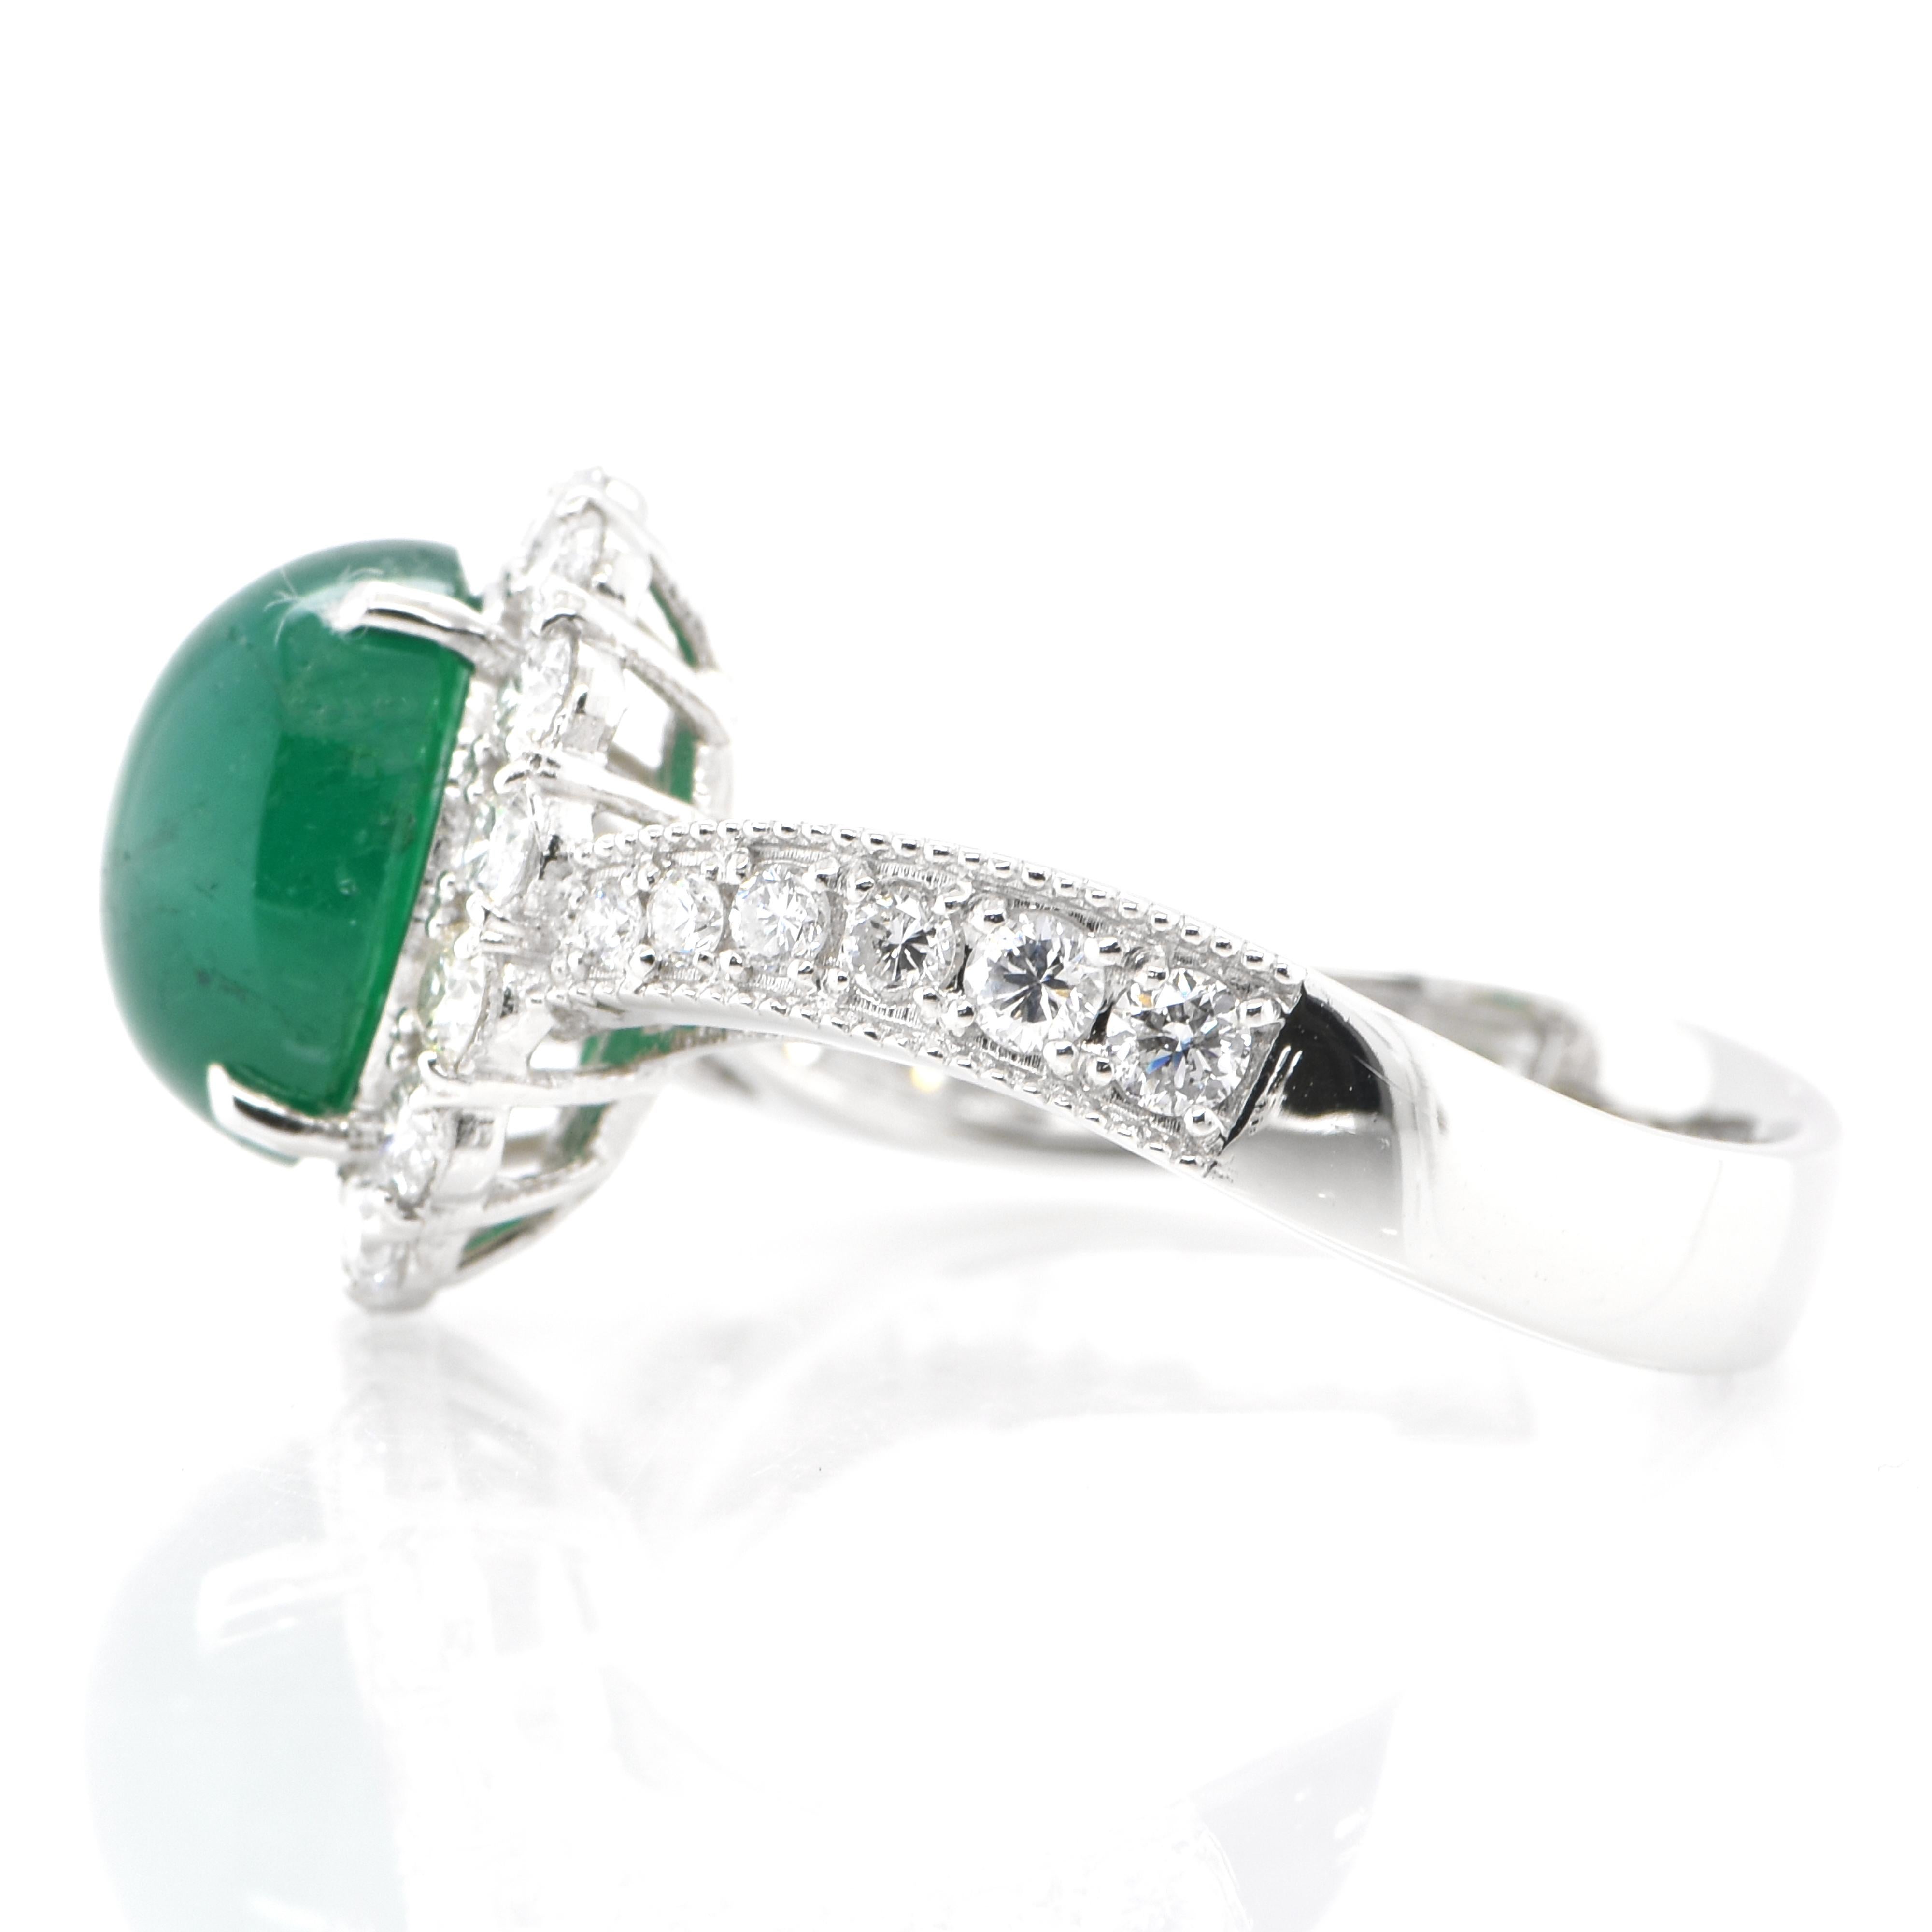 Emerald Cut 2.70 Carat Natural Emerald Cabochon and Diamond Ring Set in Platinum For Sale